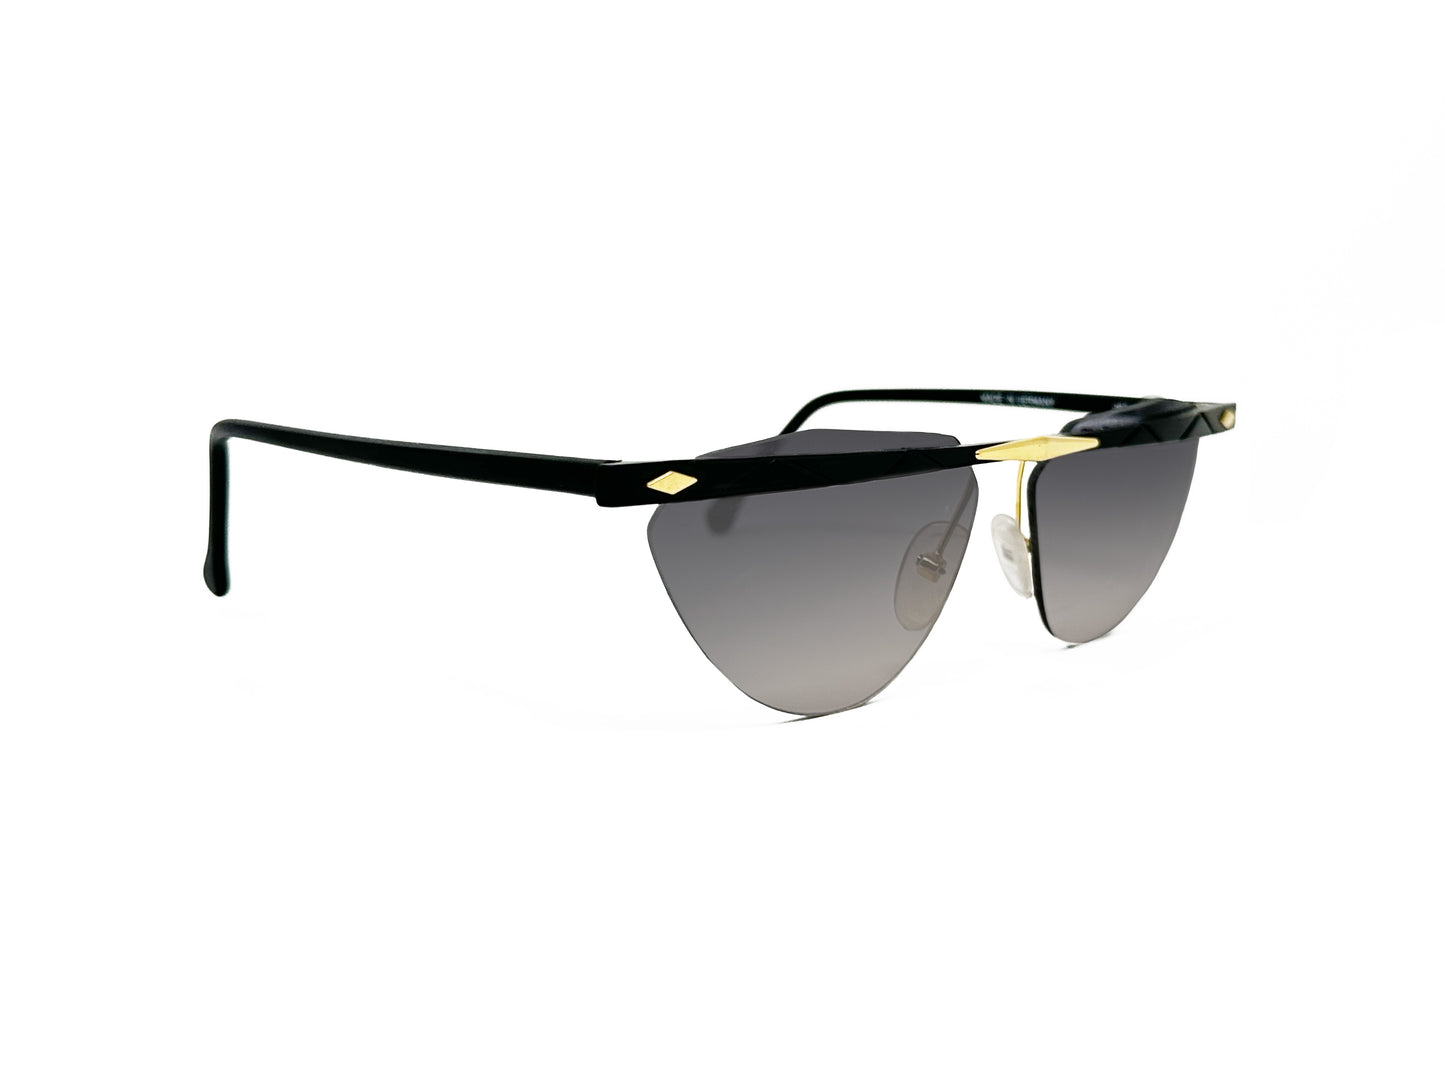 Alibi curved, triangular, sunglass with flat-top bar across front. Model: 060. Color: 10, black and gold metal. Side view.